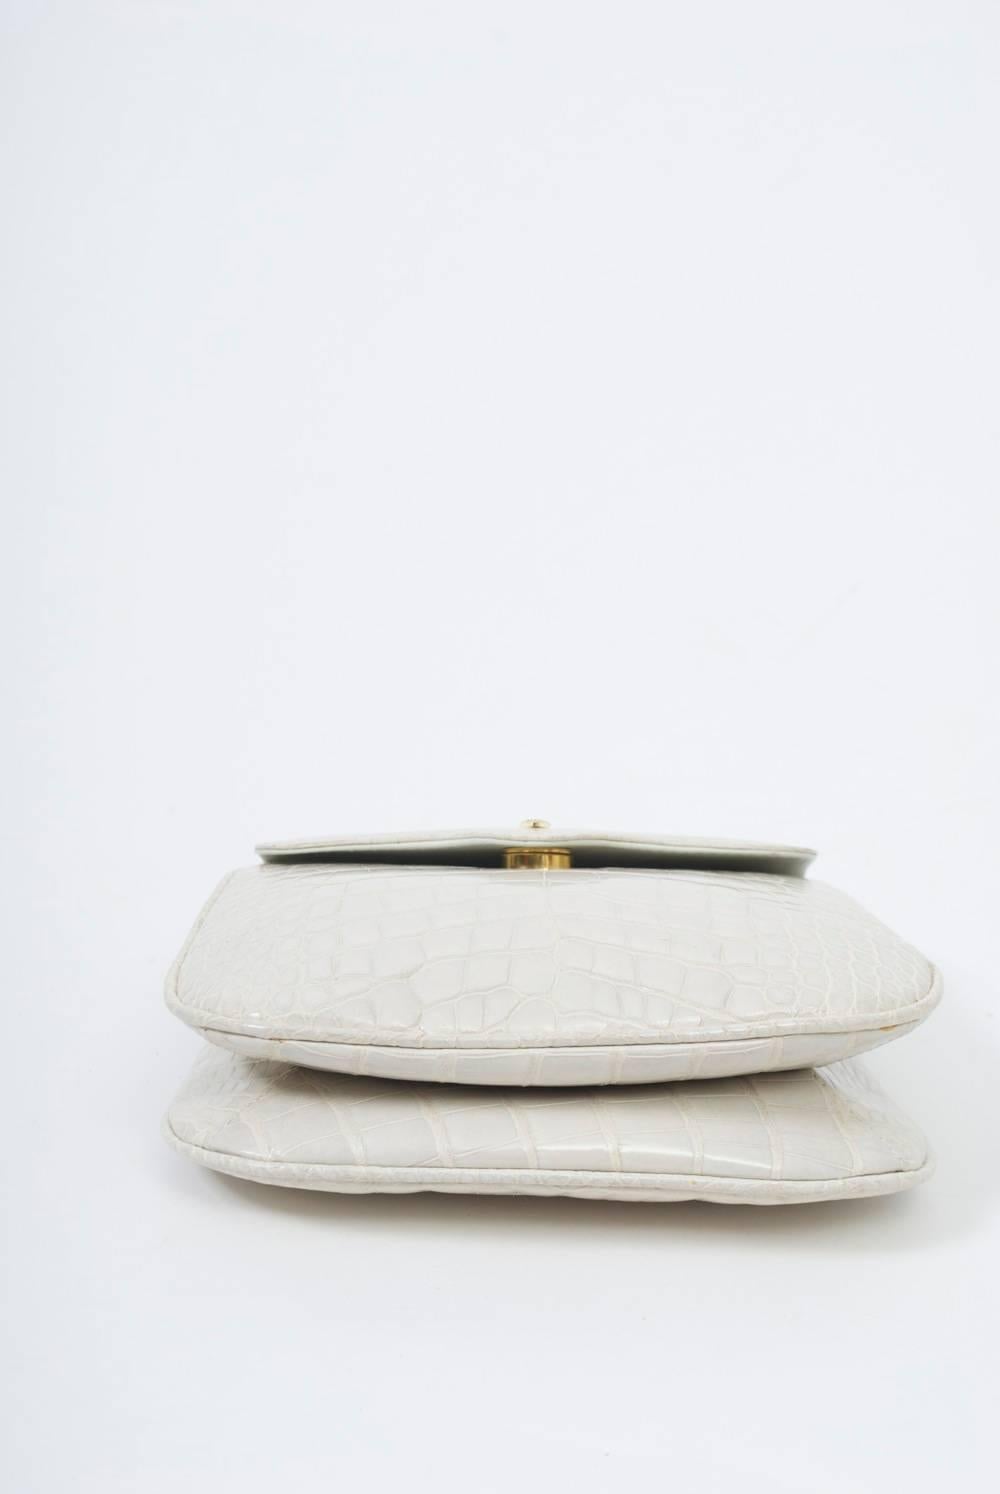 Pristine Lana of London white alligator convertible clutch featuring two different shoulder straps, one in matching skin, the other beaded with tassel. Interior with double-section interior. Original box. A very special opportunity.